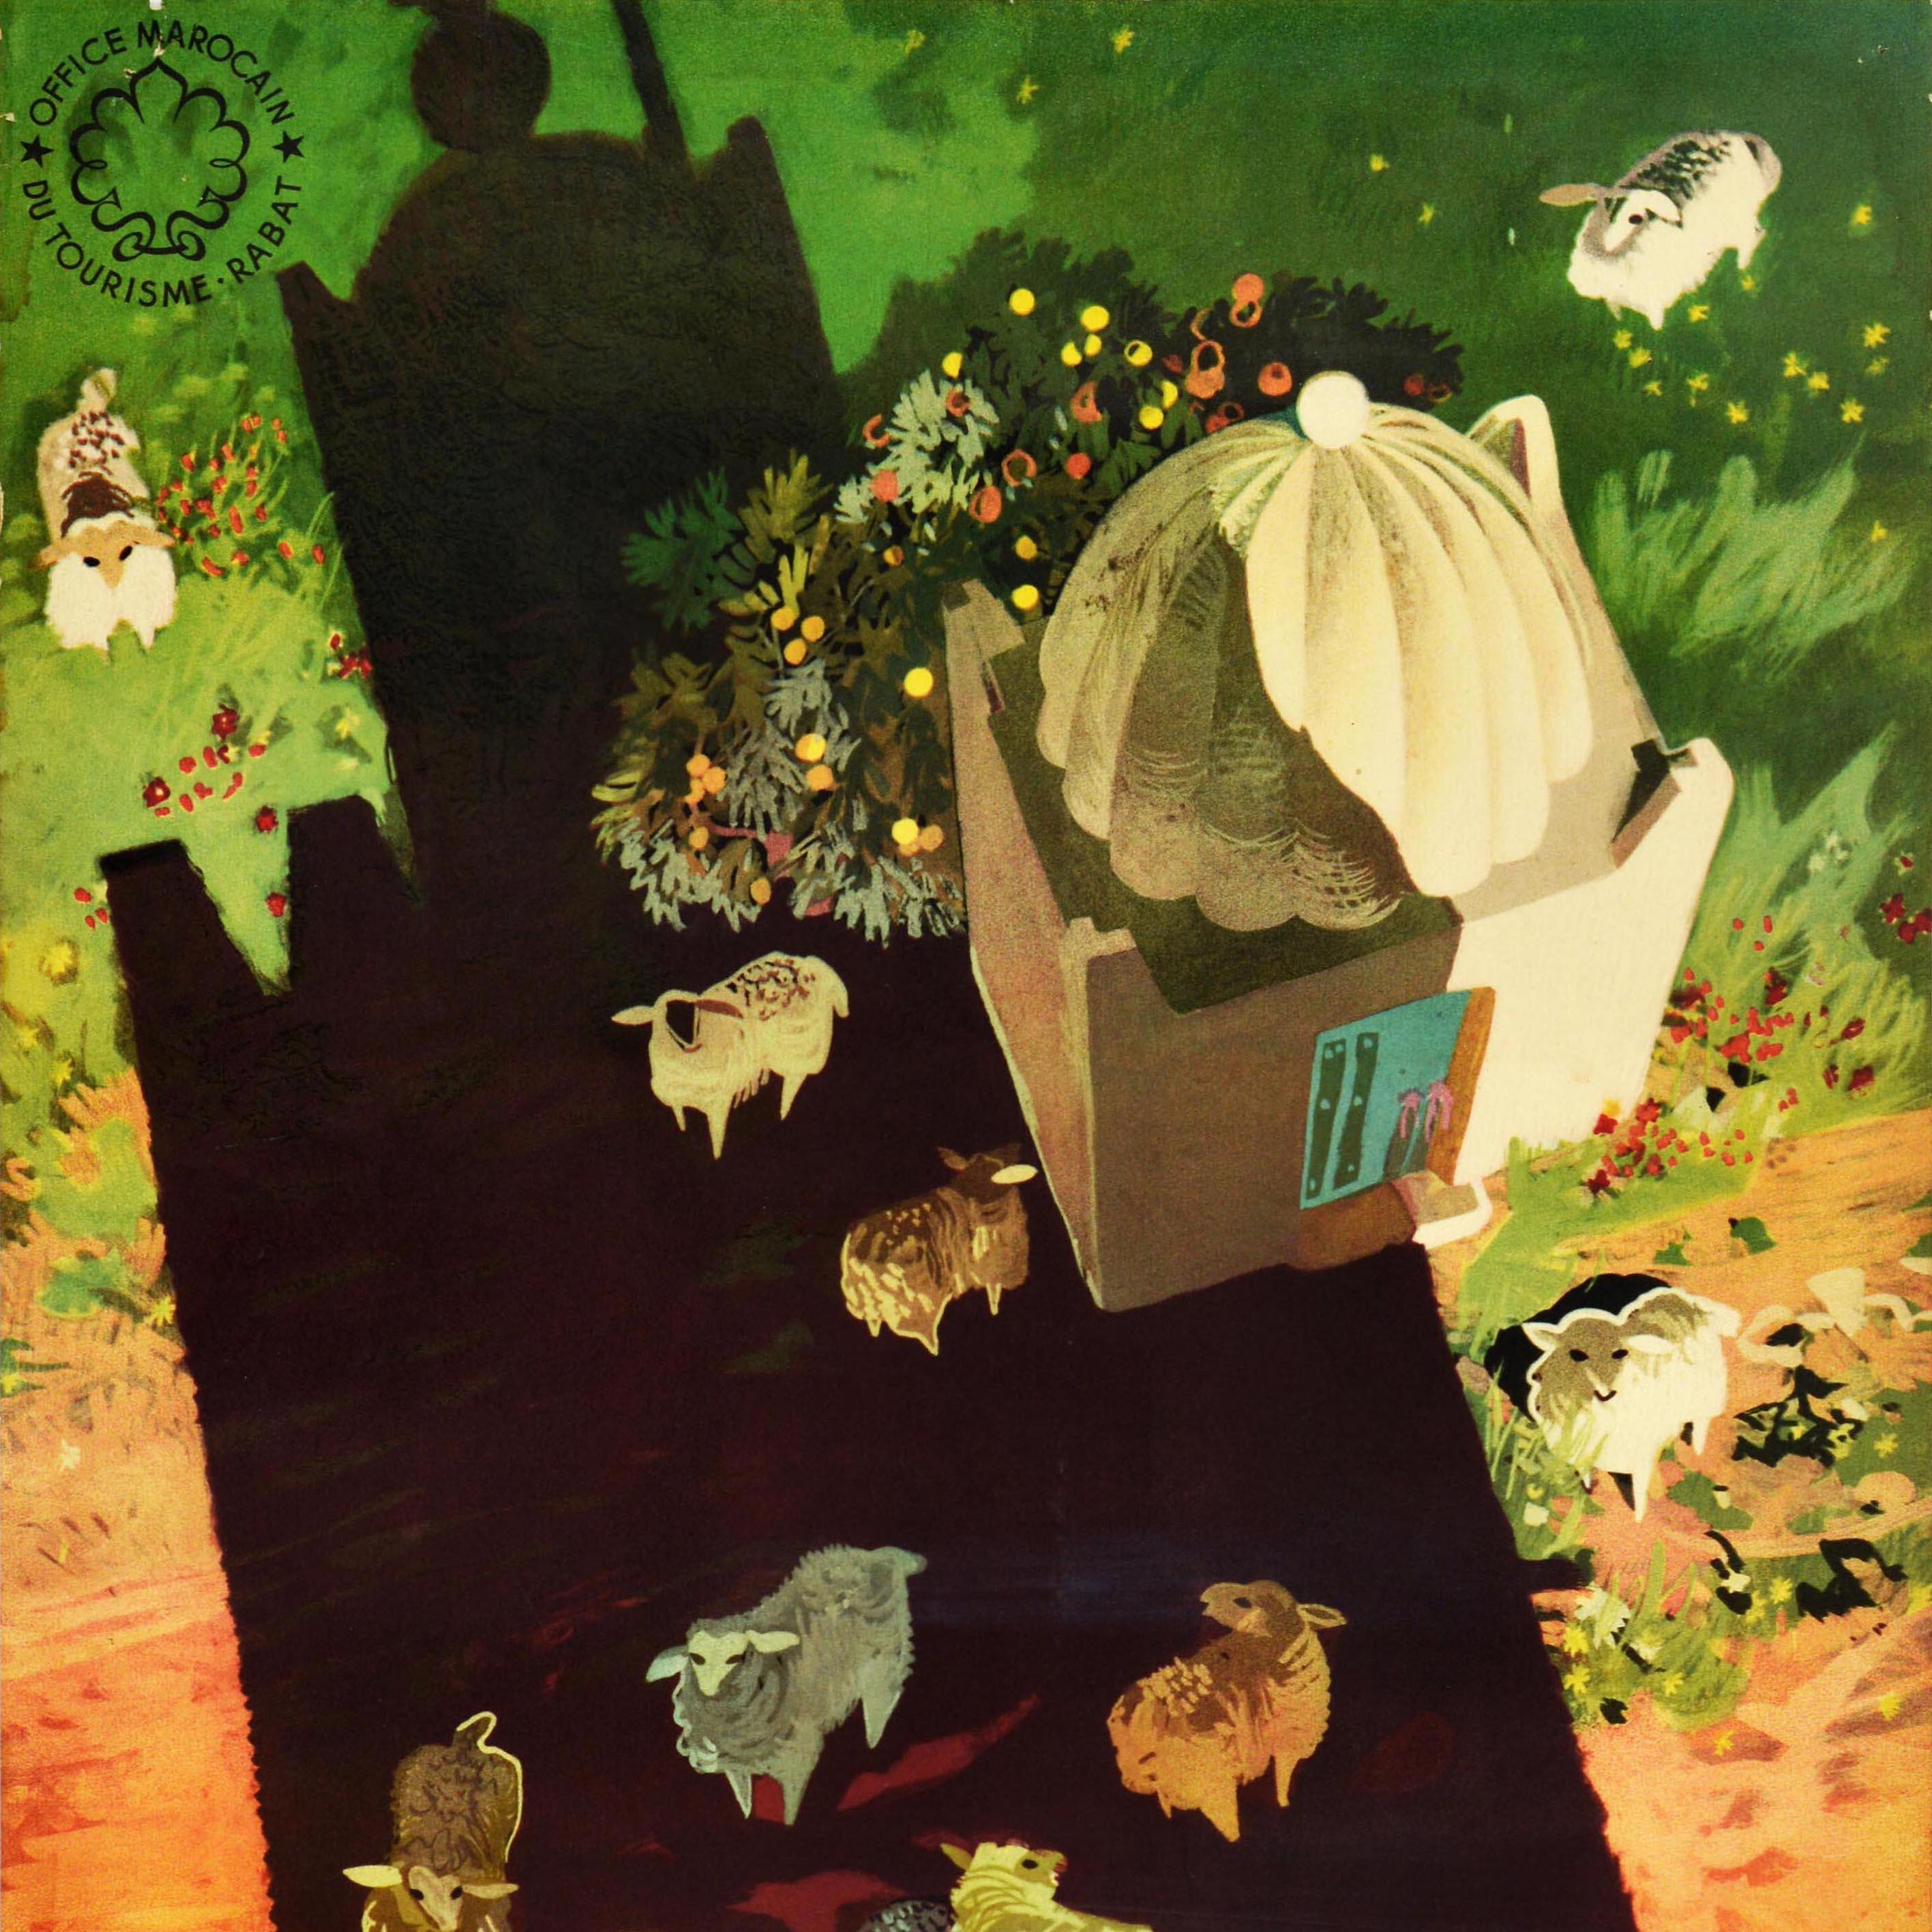 Original vintage travel poster for Morocco issued by the Moroccan Tourist Bureau Rabat featuring a great design of a shepherd with his flock of sheep next to grass on a lane by a small domed building, looking down from a tall building casting a